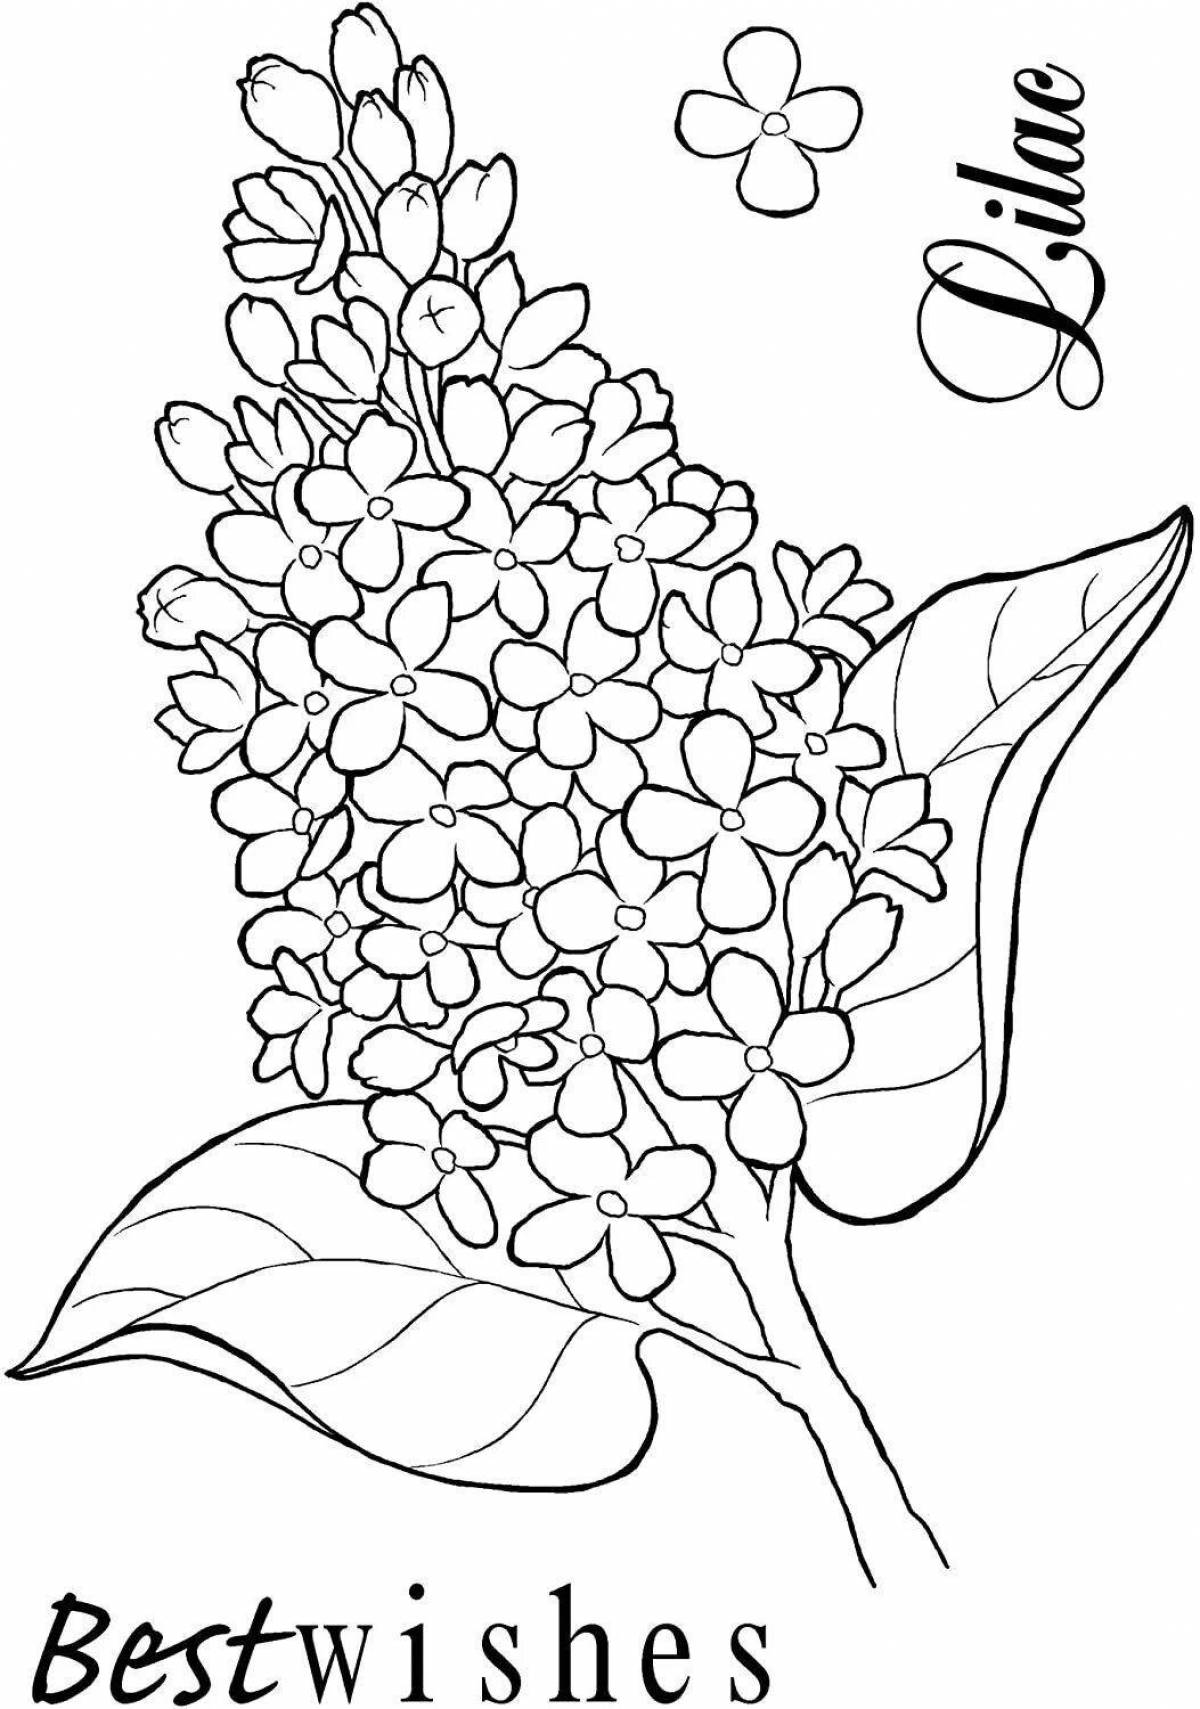 A fun cherry bird coloring book for teenagers